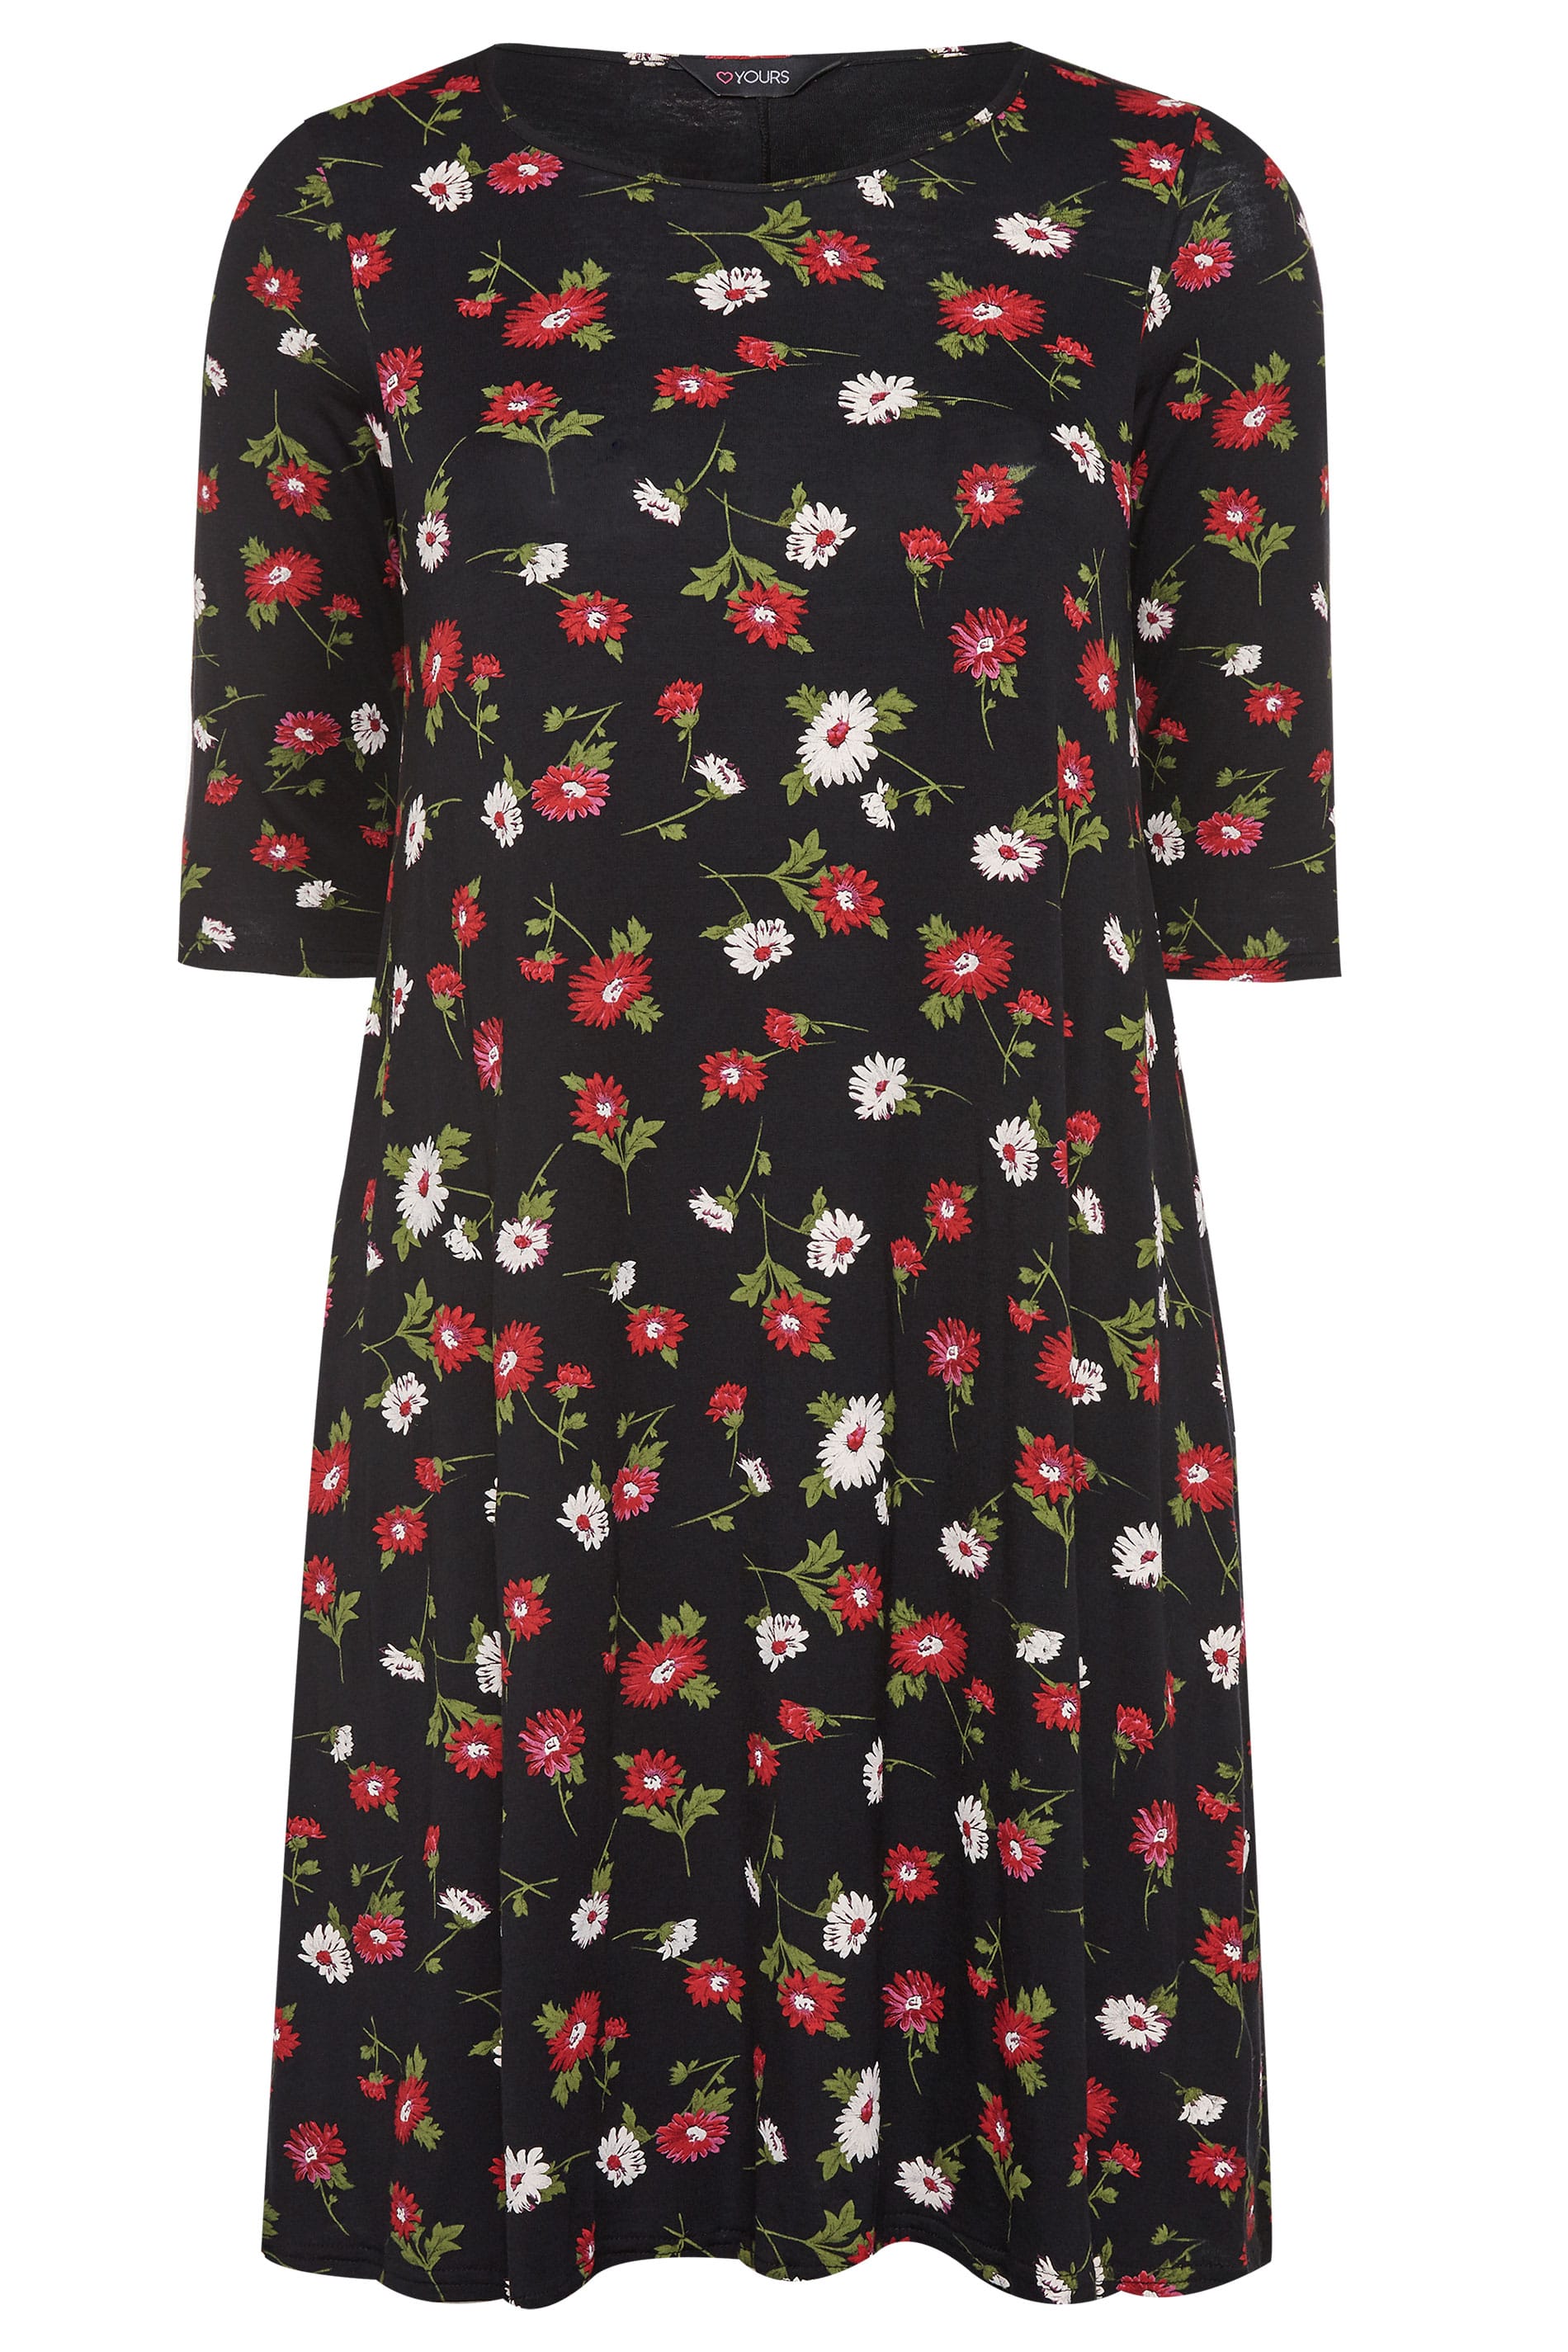 Black & Red Floral Swing Dress | Yours Clothing